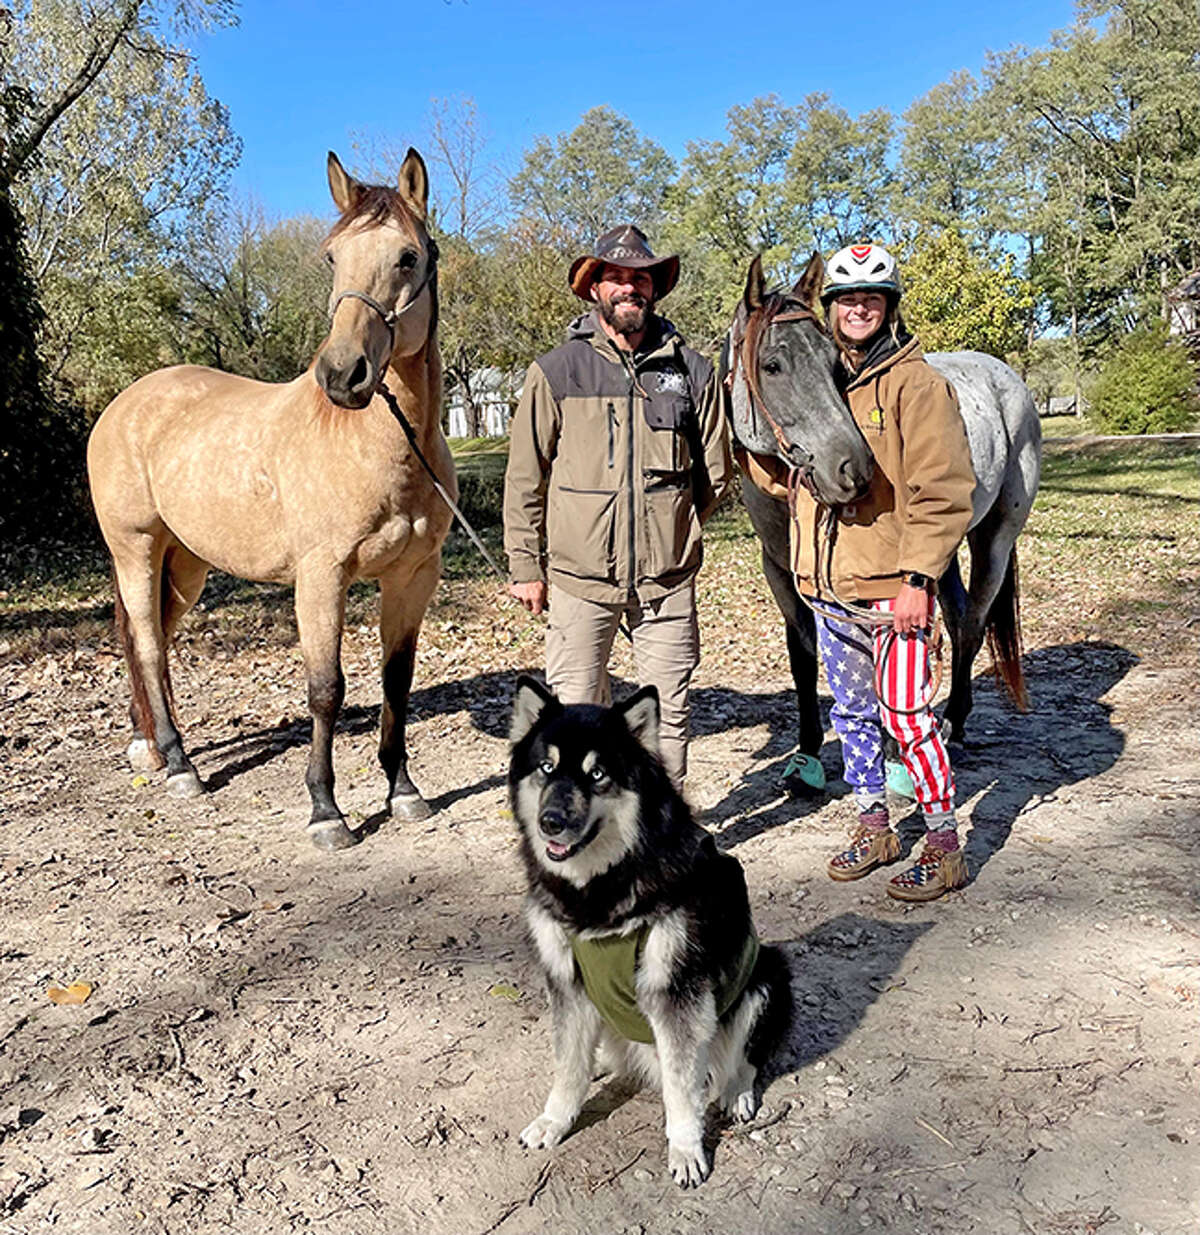 Matt Perella, left, his horse Buck, along with Grace Heepke, her horse Goose and Perella’s dog Raffe, pose for a photo during their trip together. Heepke, a junior at Edwardsville High School, spent a week riding with Perella, who is traveling across the U.S. to raise awareness and funds for Righteous Life Rescue Ranch.